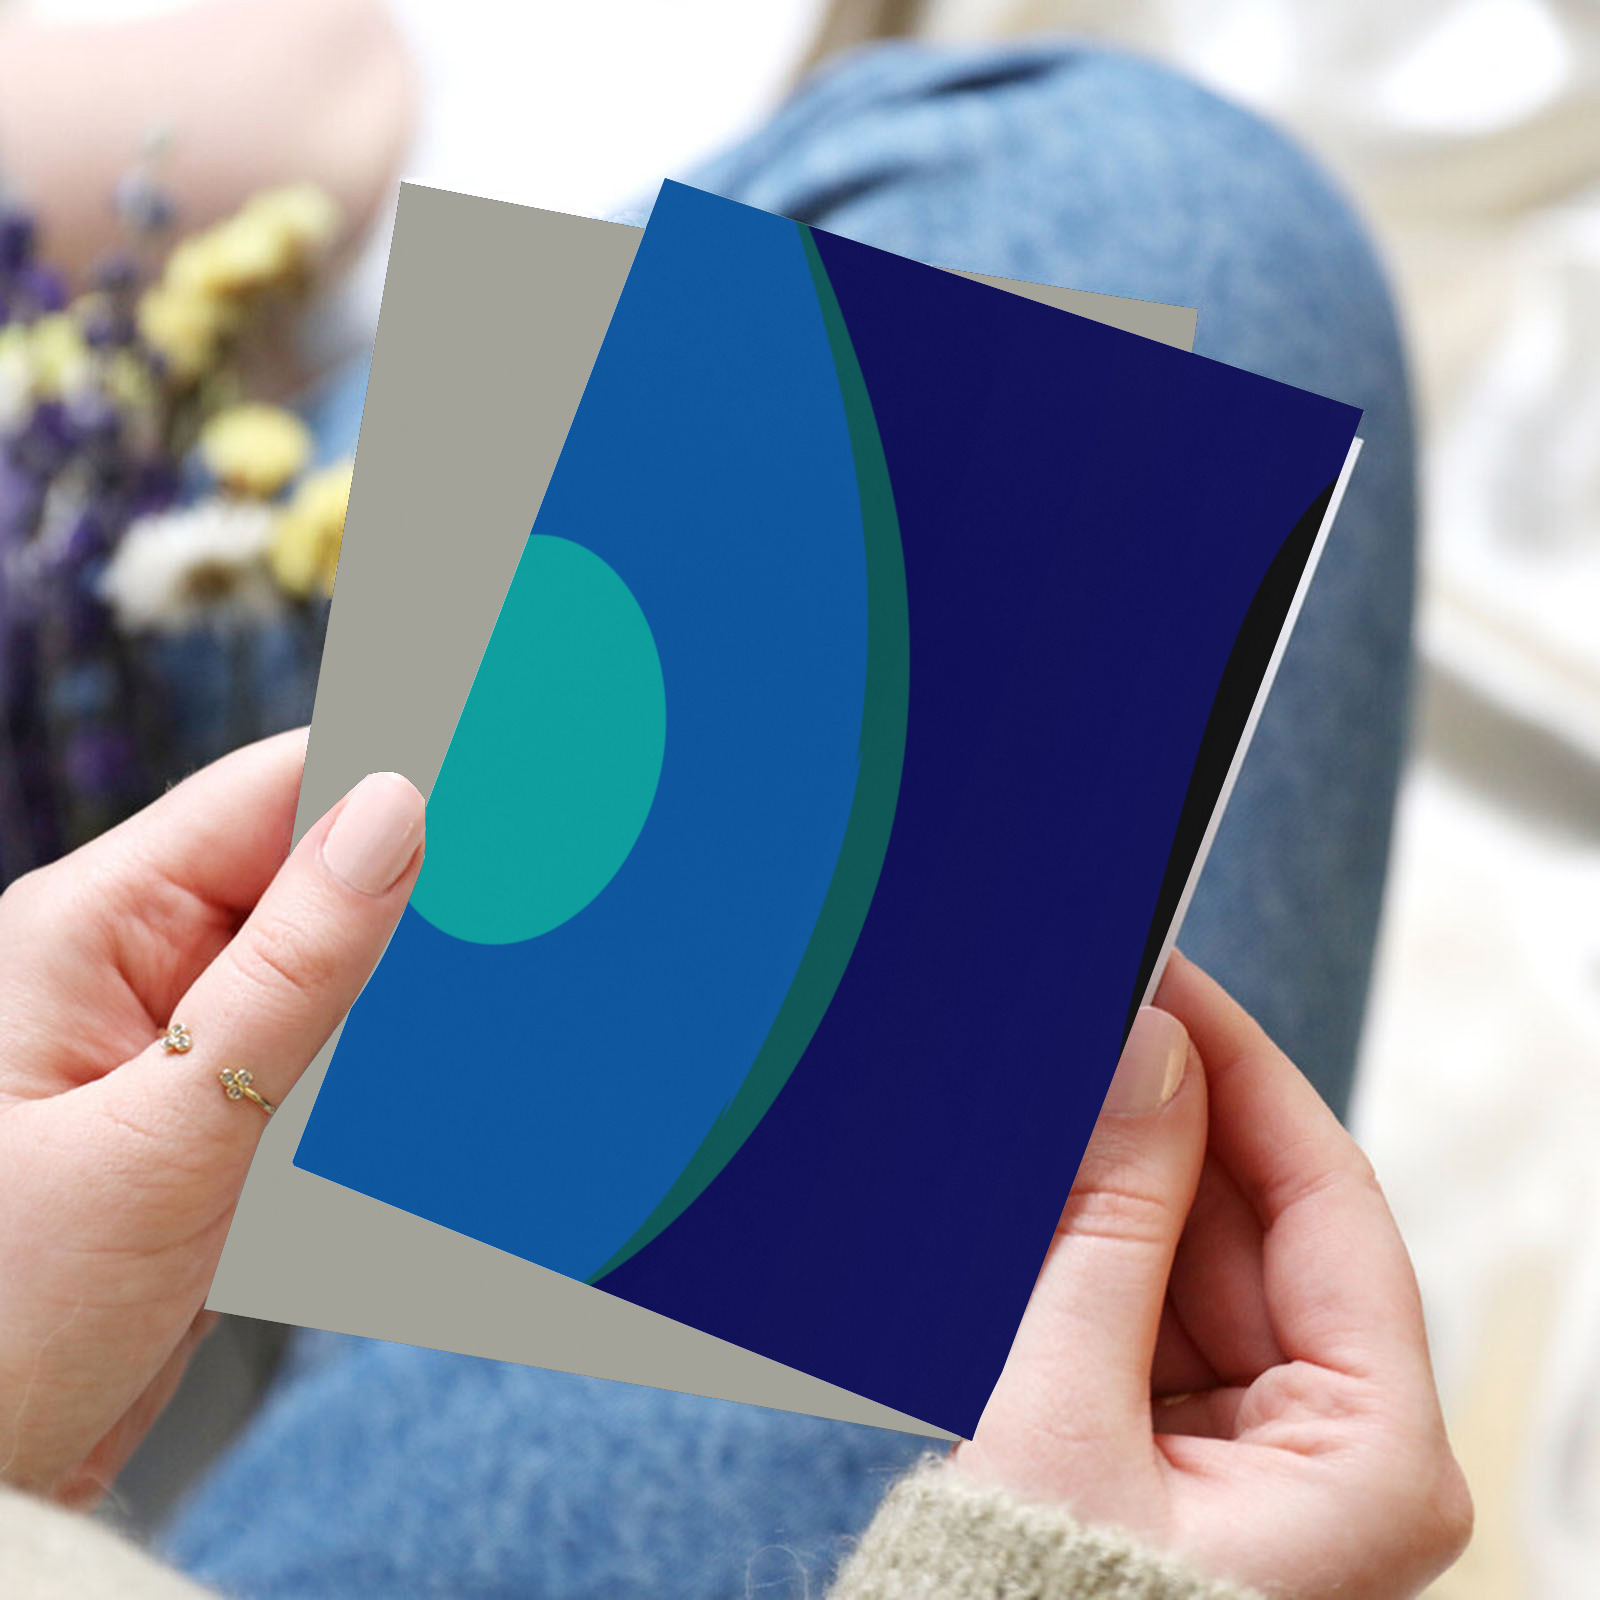 Dimensional Blue Abstract 915 Greeting Card 8"x6"